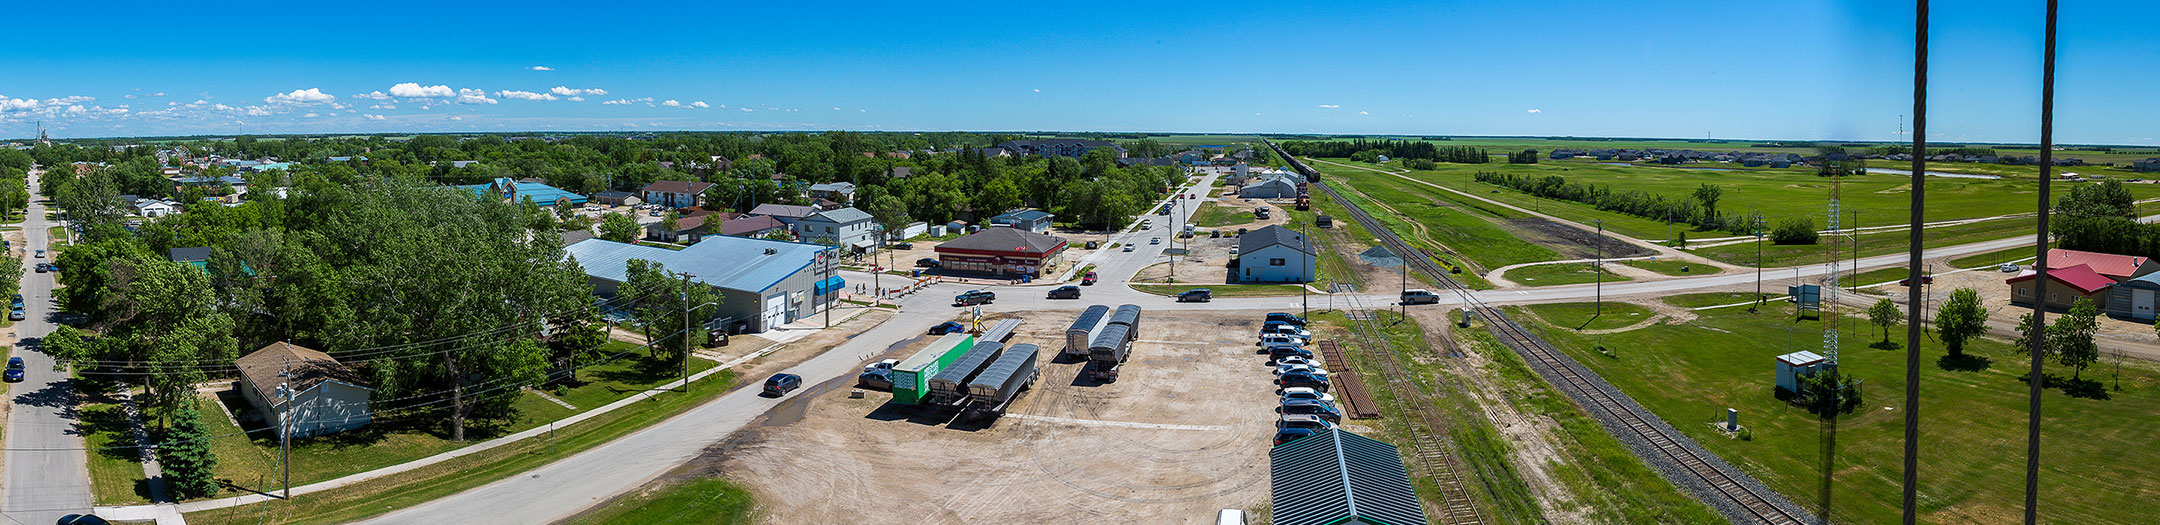 town-services-town-of-niverville